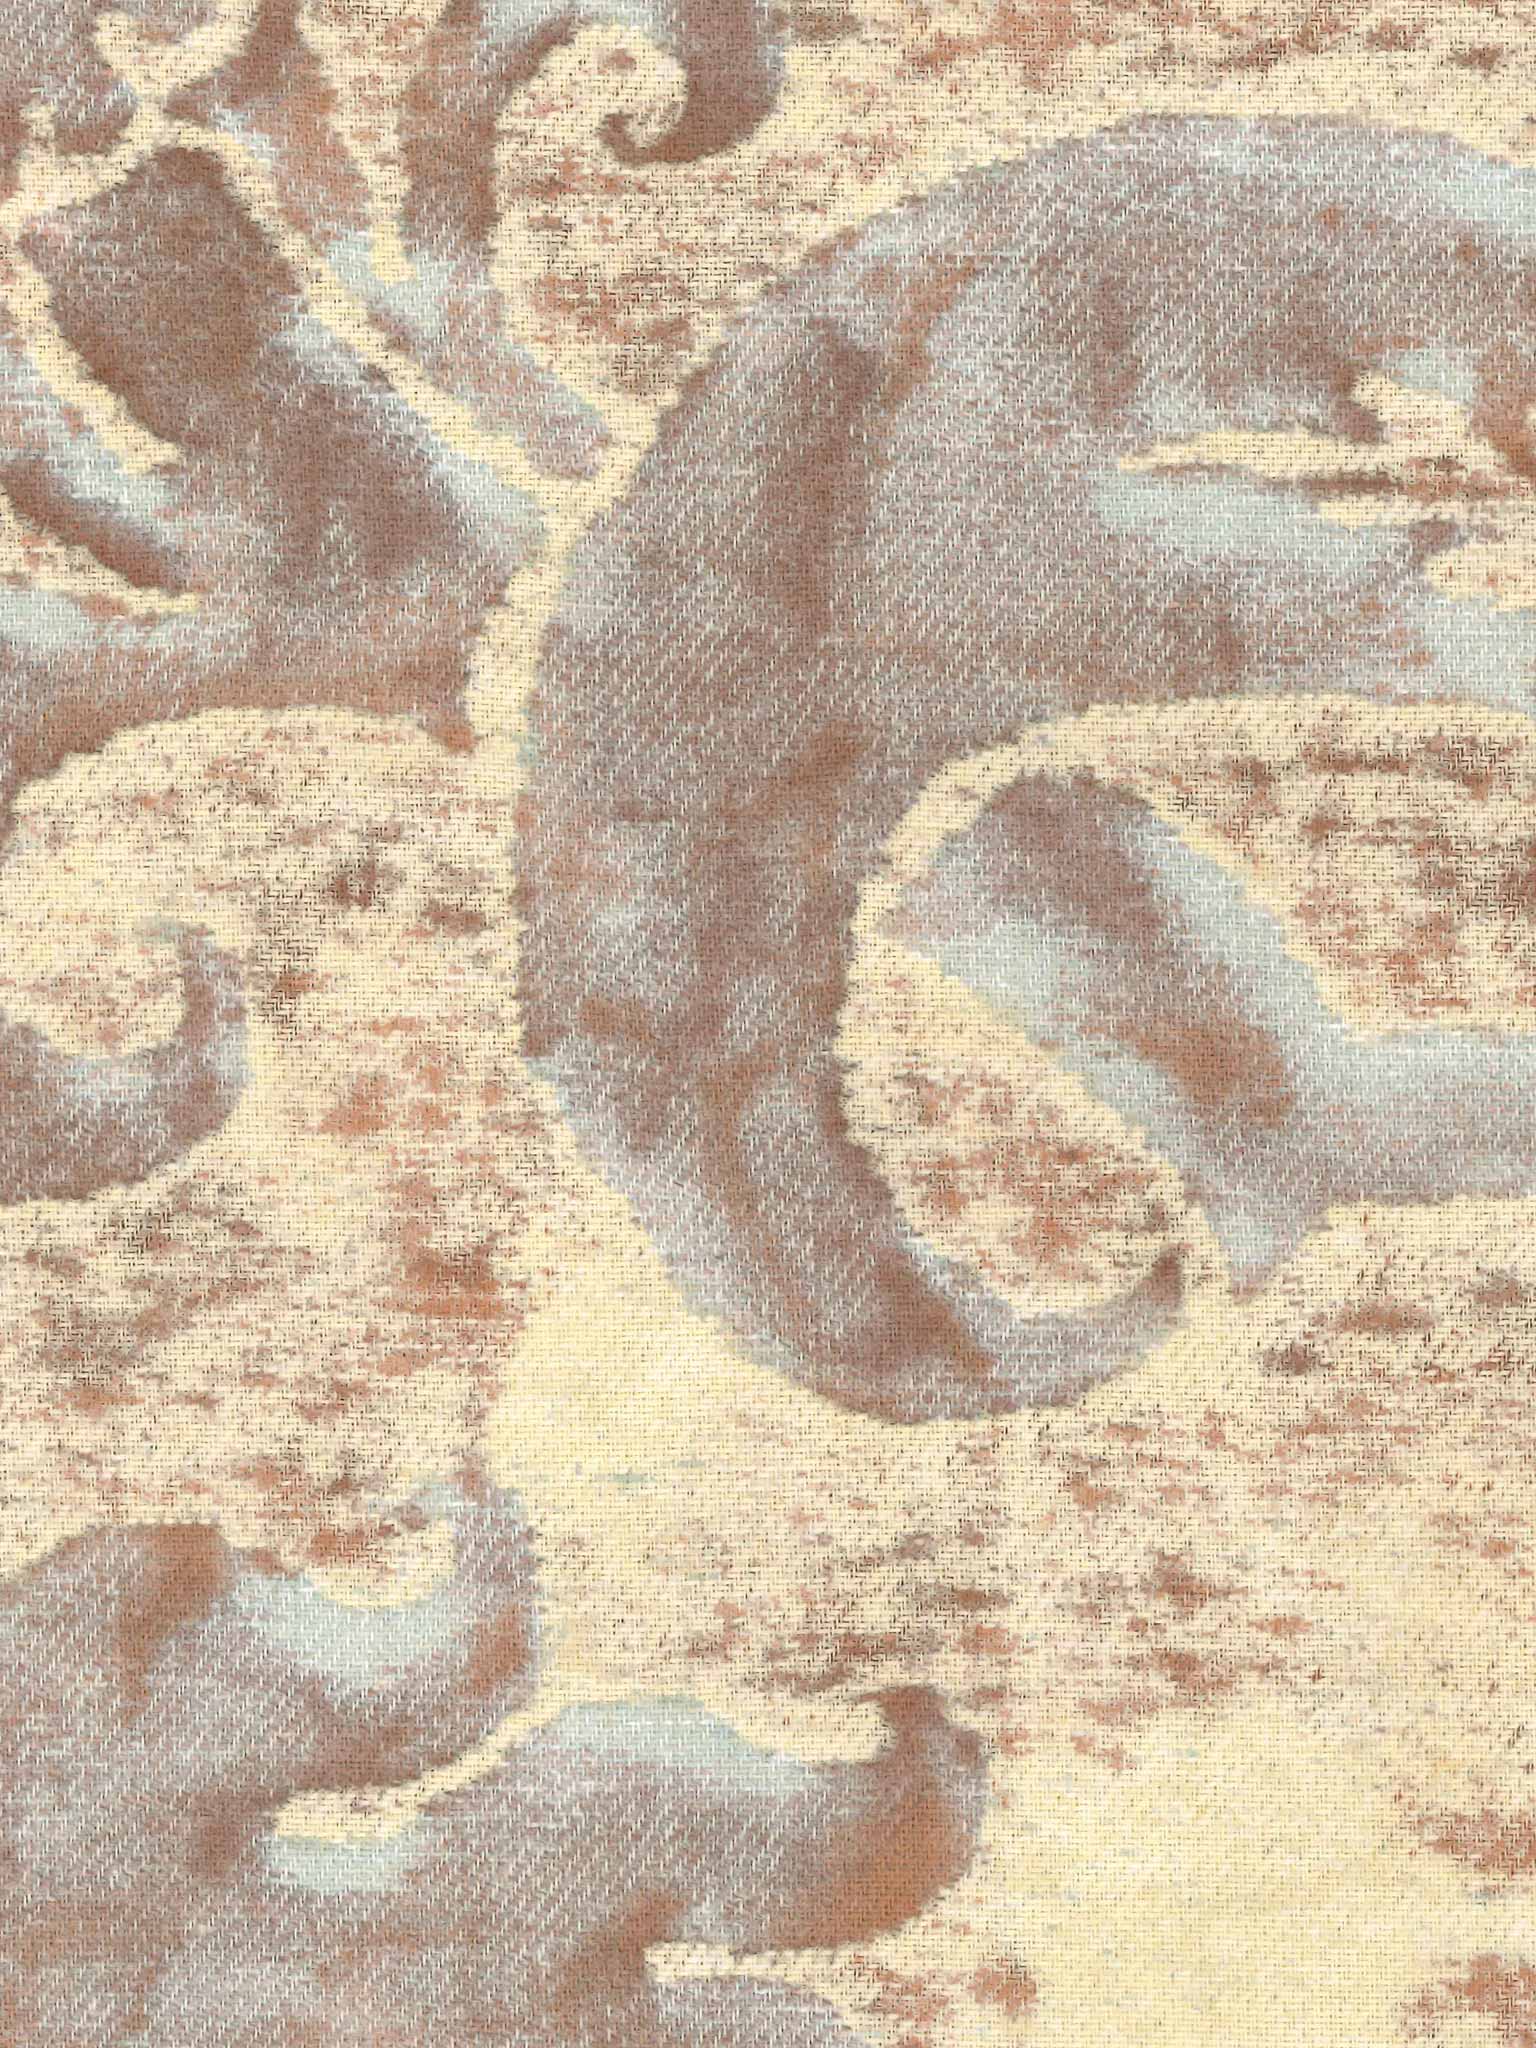 GLICINE in rust & blue on parchment texture - Fortuny